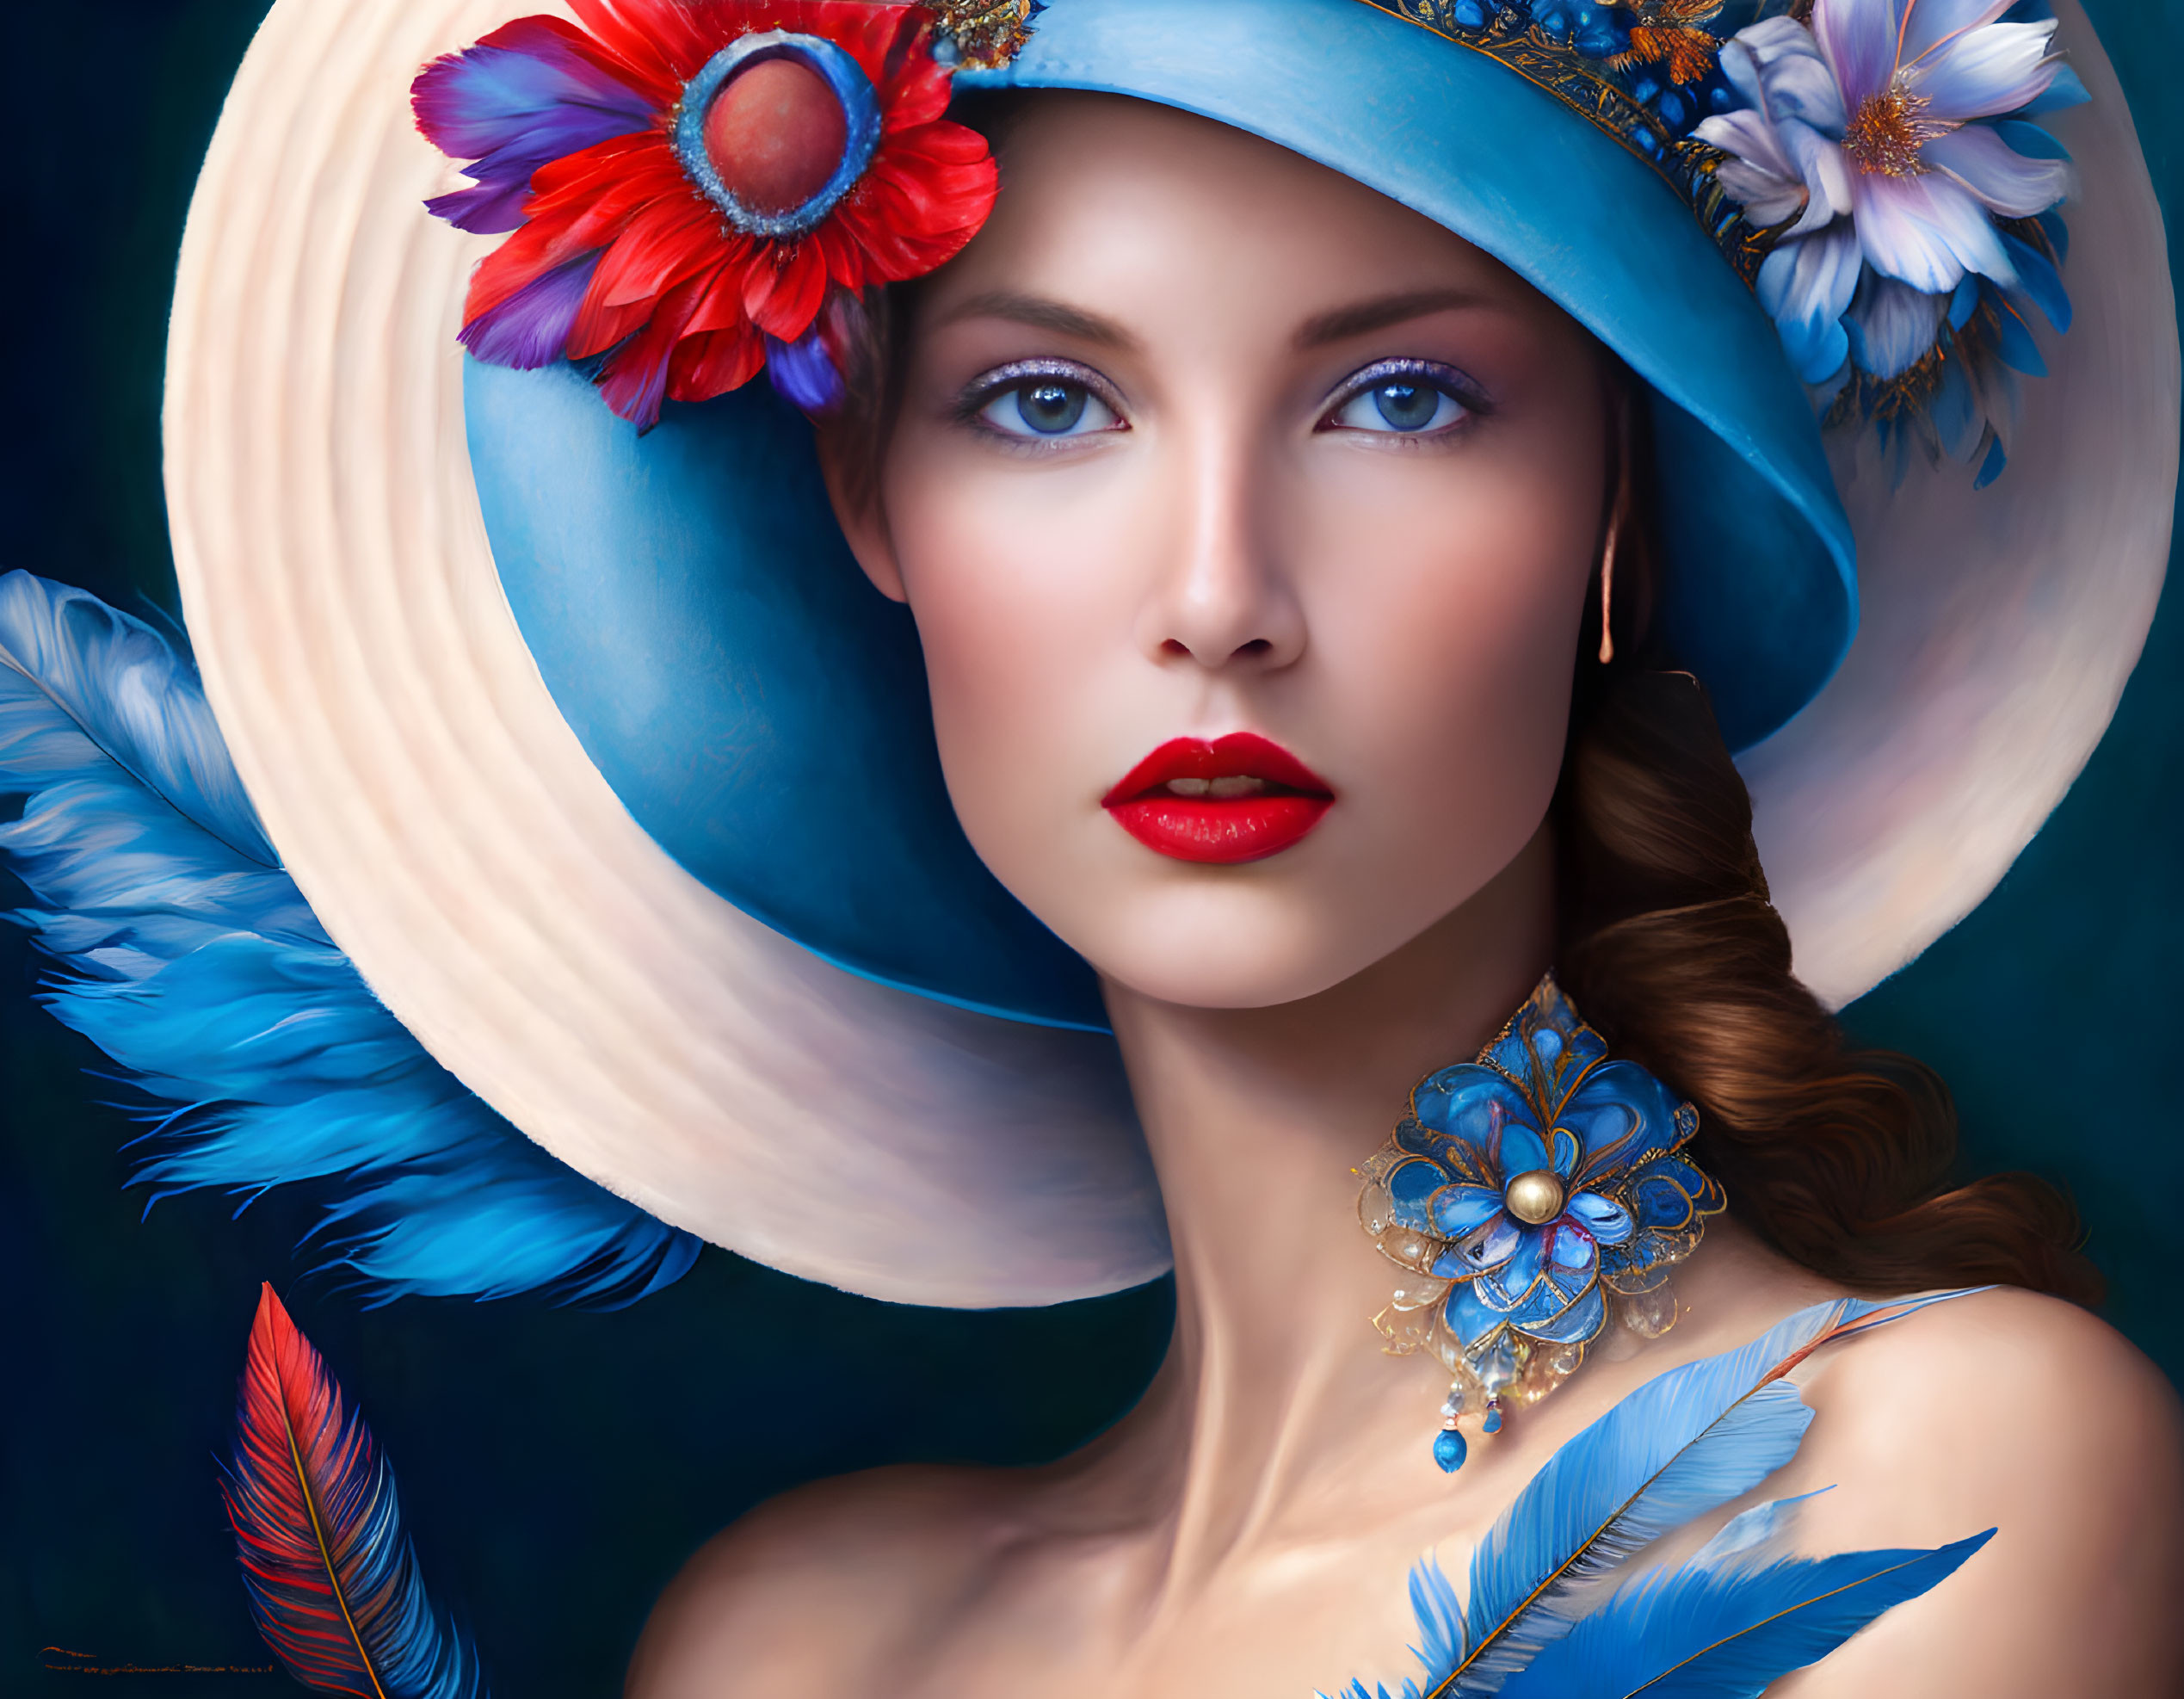 Woman wearing blue wide-brimmed hat with red and white flowers and feather details, matching floral necklace